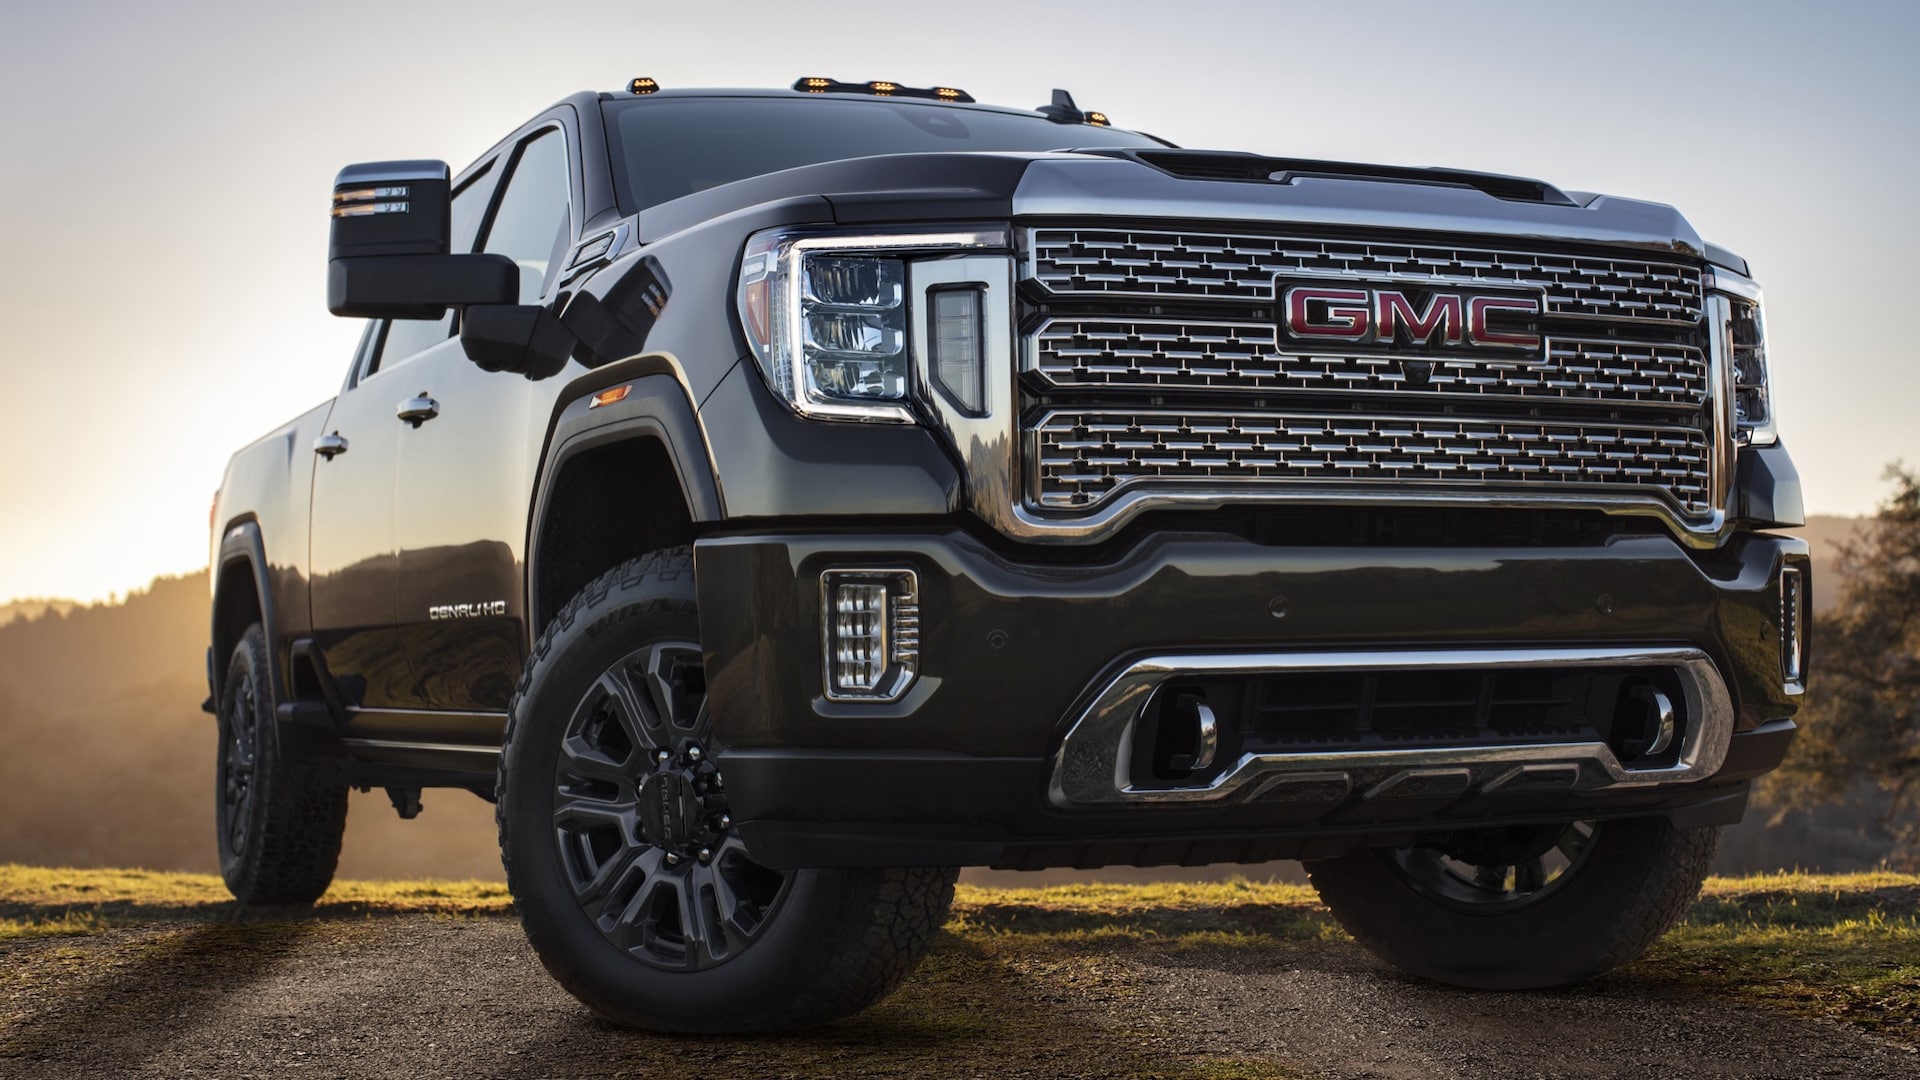 2021 GMC Sierra 1500 and HD First Look: Towing Upgrades, Cheaper Diesel